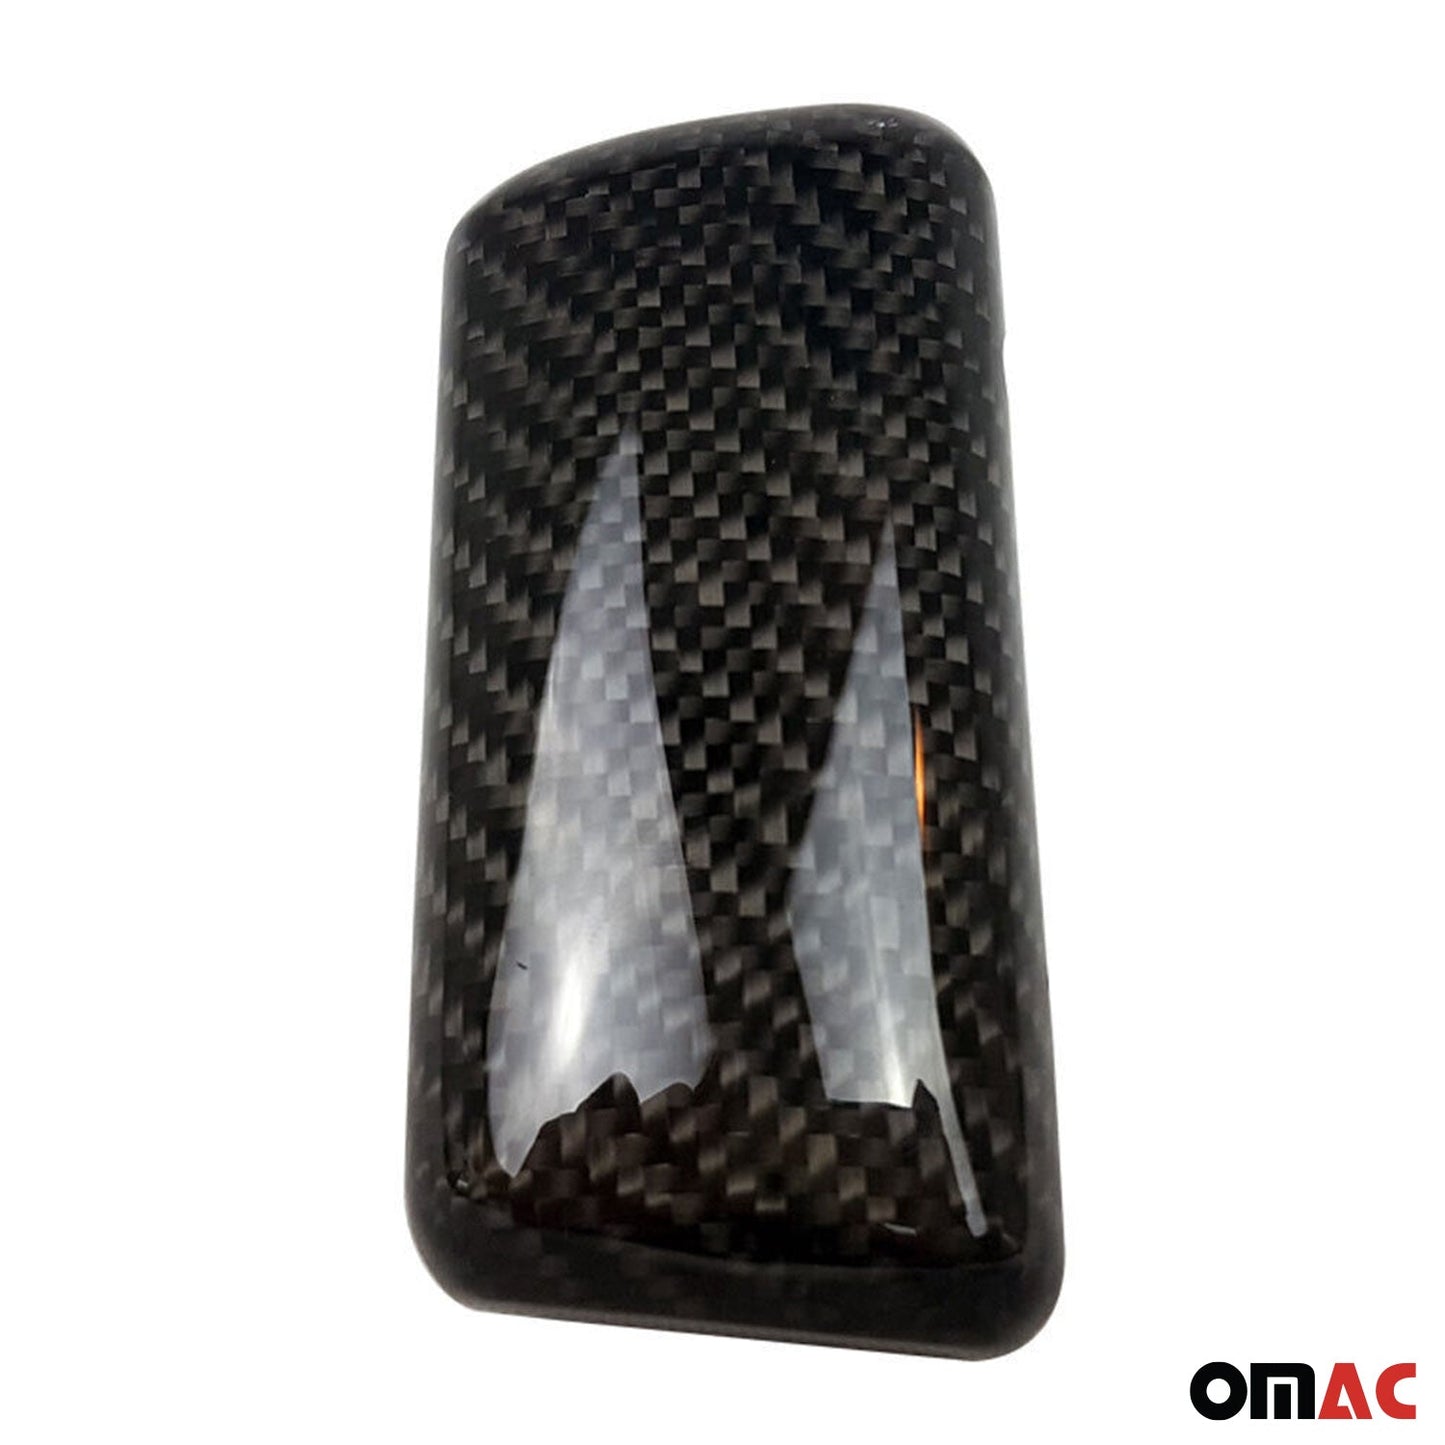 OMAC Gear Shift Knob for BMW E38 E39 E46 E60 E61 E63 E64 Carbon Automatic T-Handle A001770